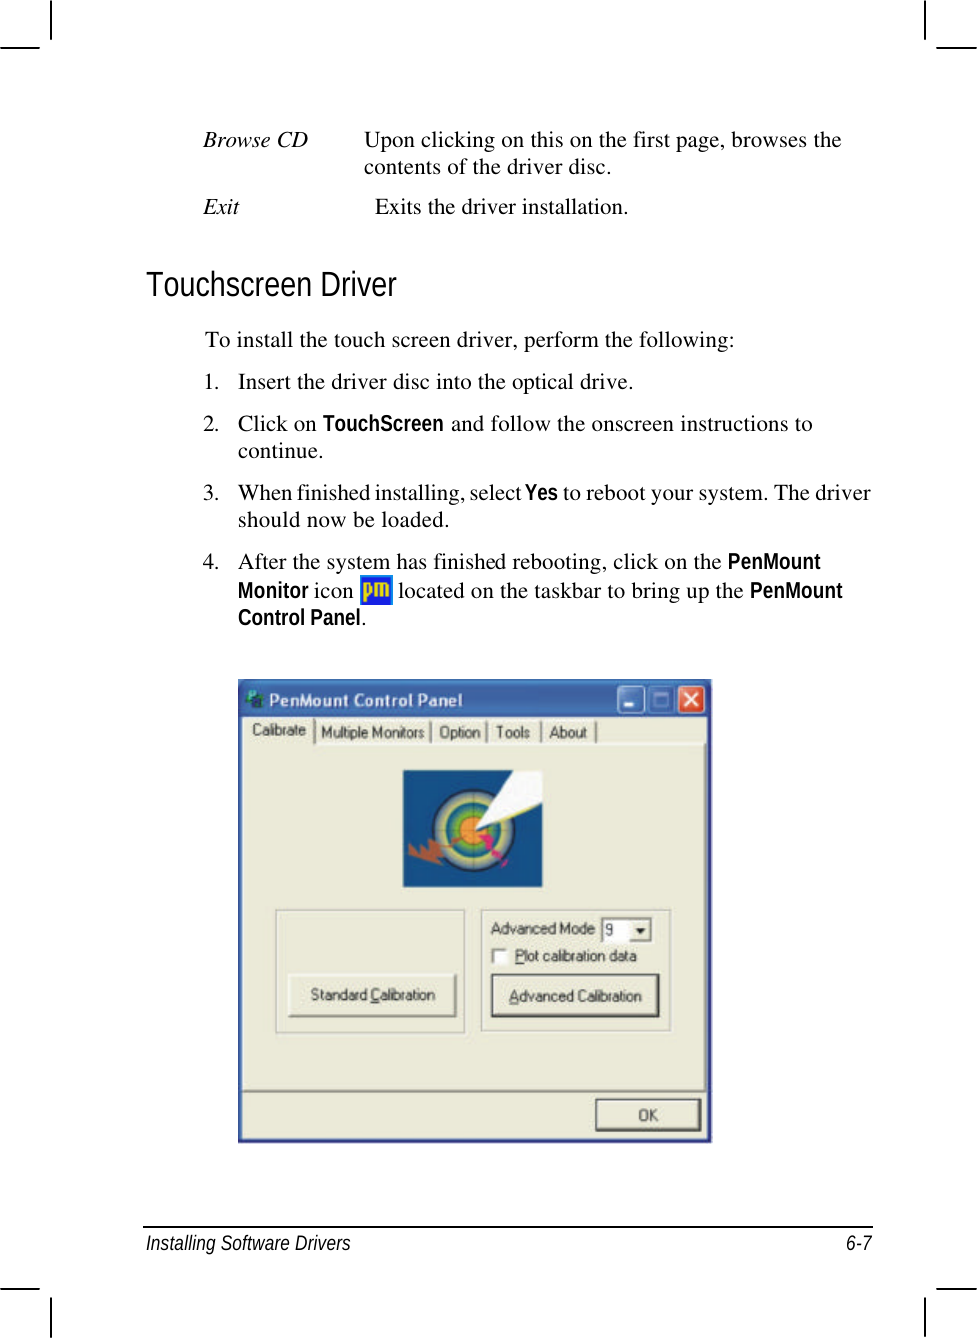  Installing Software Drivers 6-7 Browse CD Upon clicking on this on the first page, browses the contents of the driver disc. Exit Exits the driver installation. Touchscreen Driver To install the touch screen driver, perform the following: 1. Insert the driver disc into the optical drive. 2. Click on TouchScreen and follow the onscreen instructions to continue. 3. When finished installing, select Yes to reboot your system. The driver should now be loaded. 4. After the system has finished rebooting, click on the PenMount Monitor icon   located on the taskbar to bring up the PenMount Control Panel.  